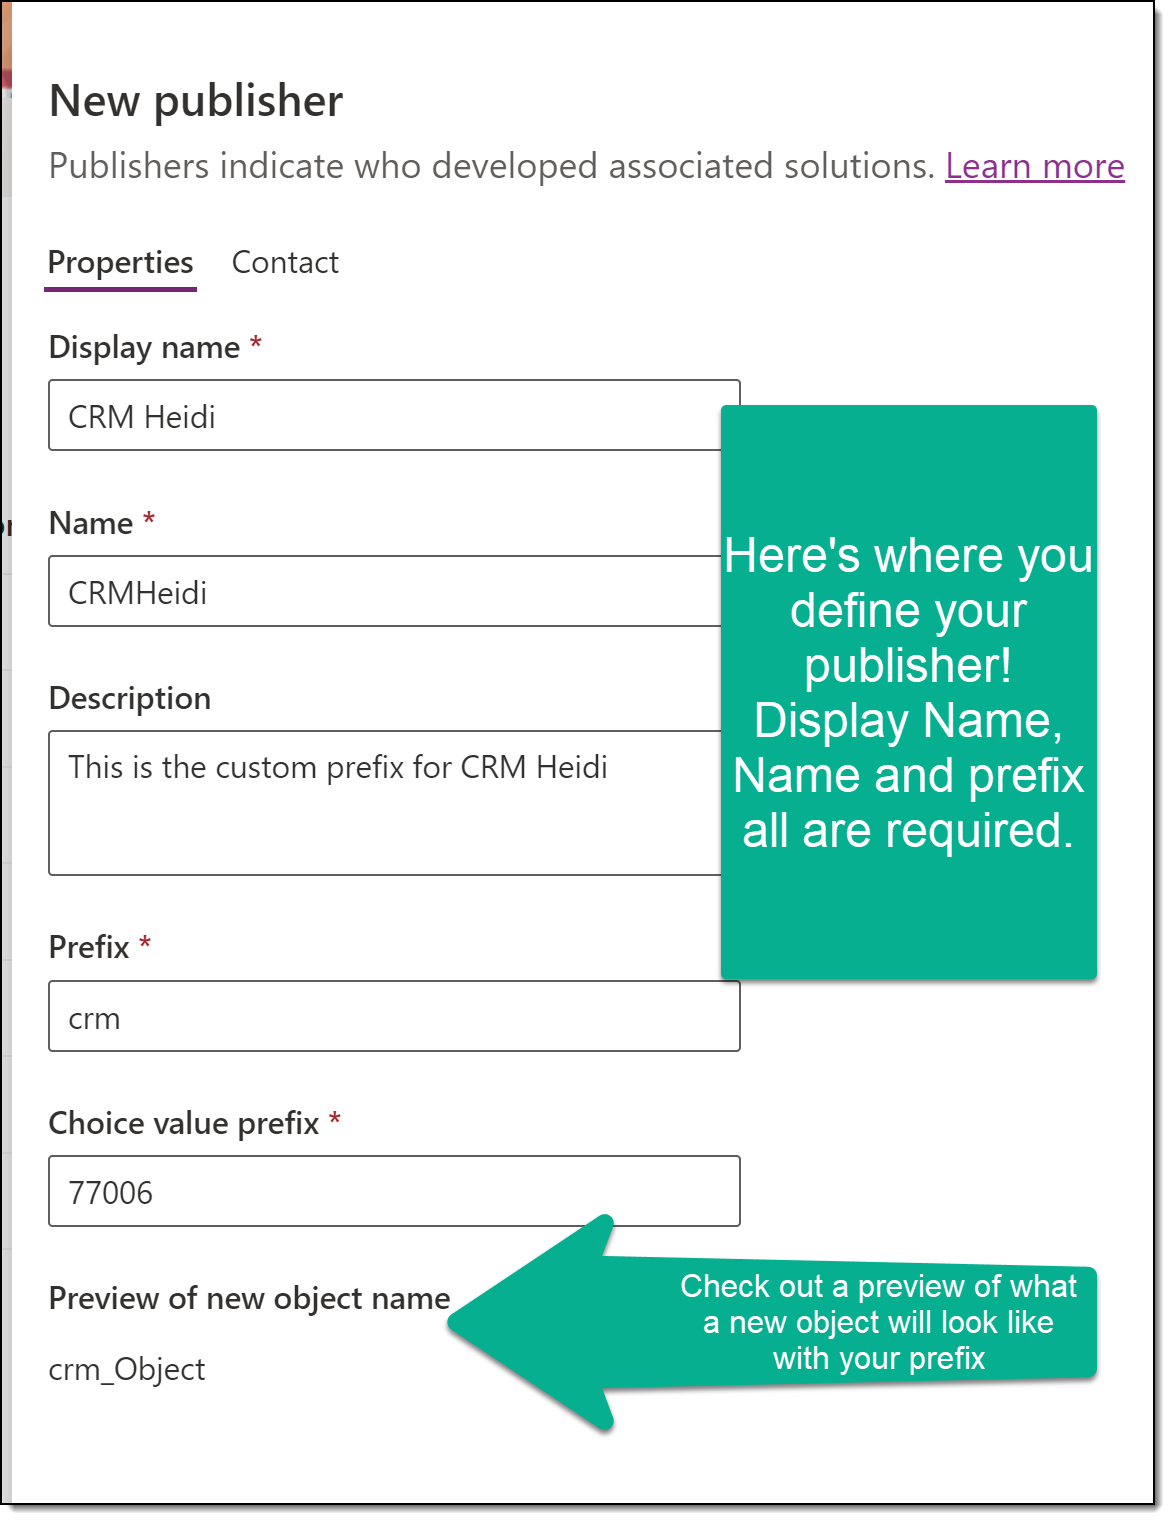 Fill out the correct fields to create a new publisher